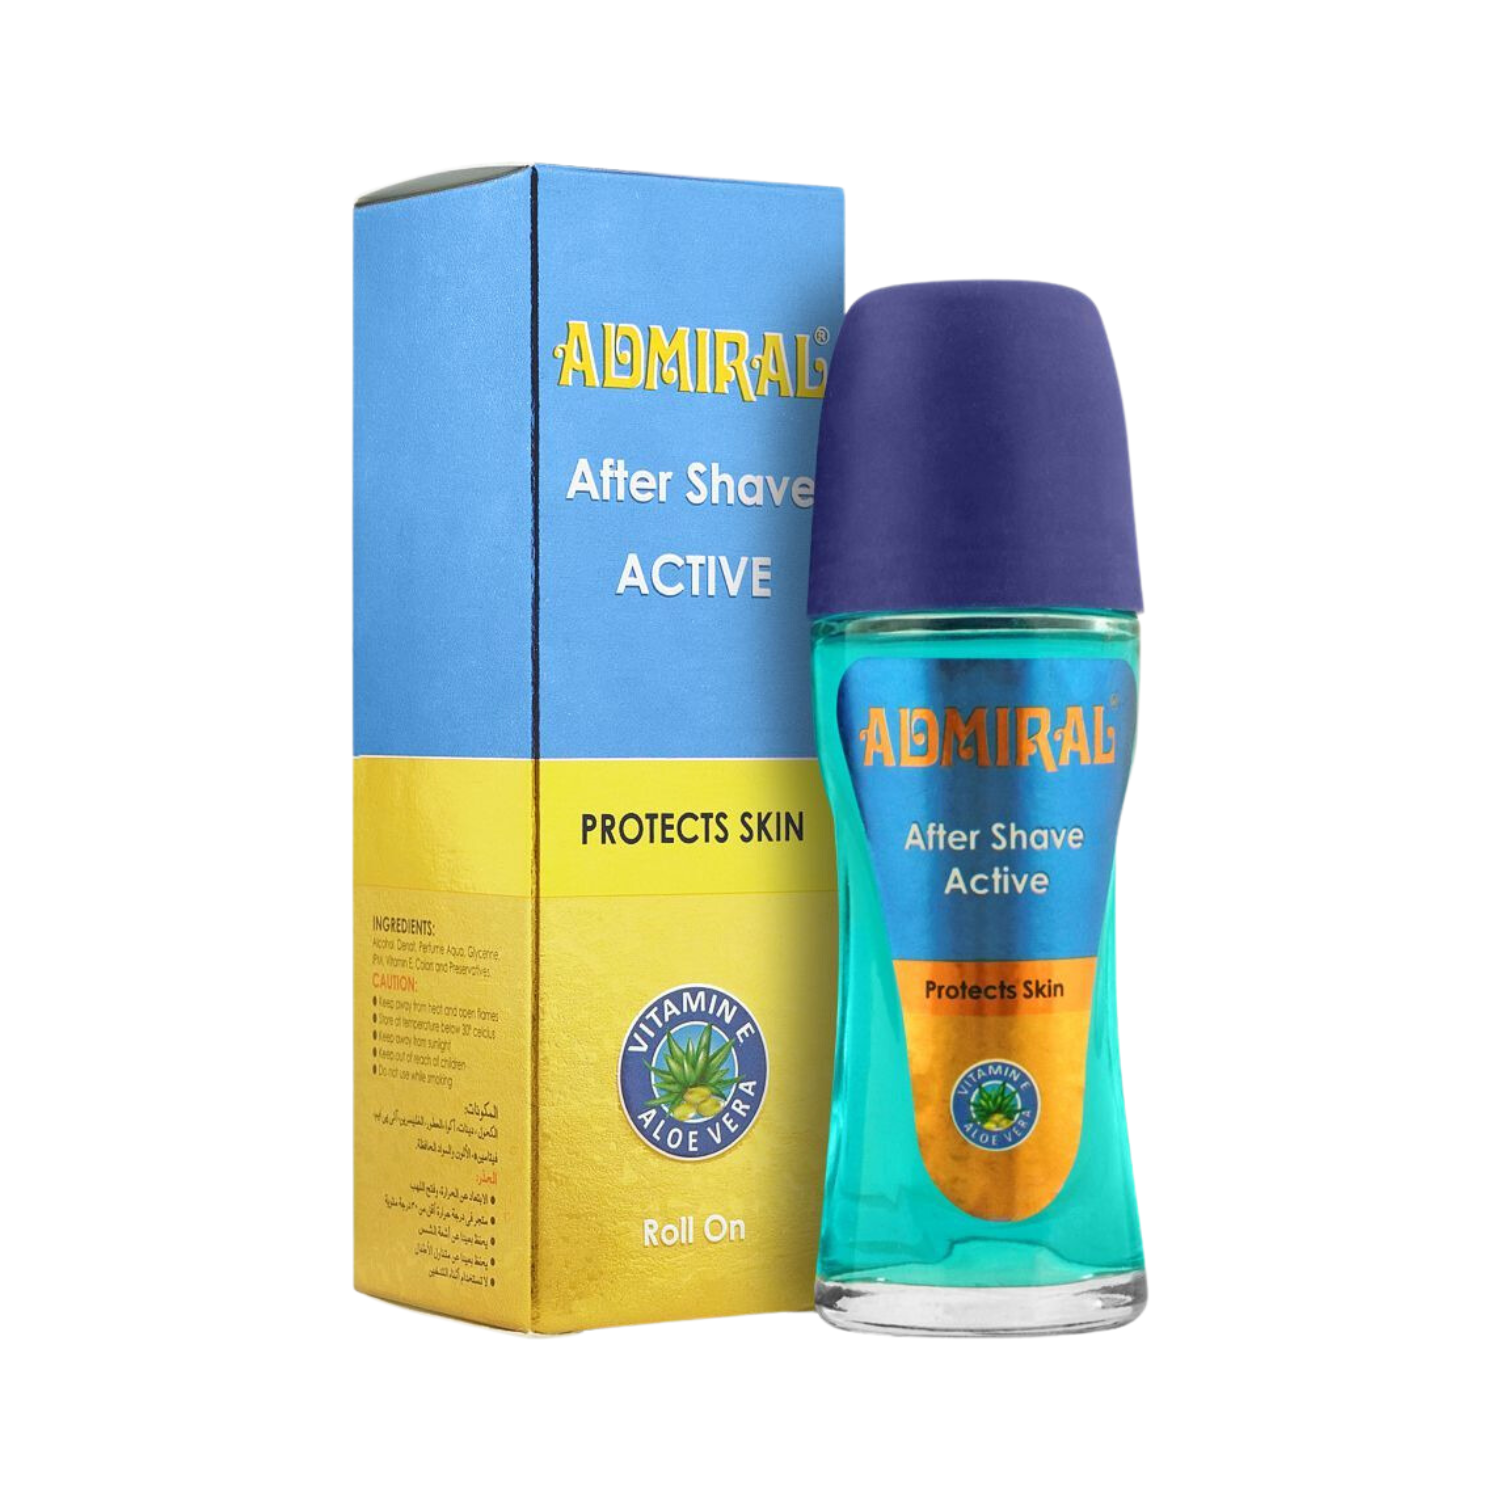 admiral-after-shave-active-roll-on-protects-skin-with-vitamin-e-aloe-vera-50ml